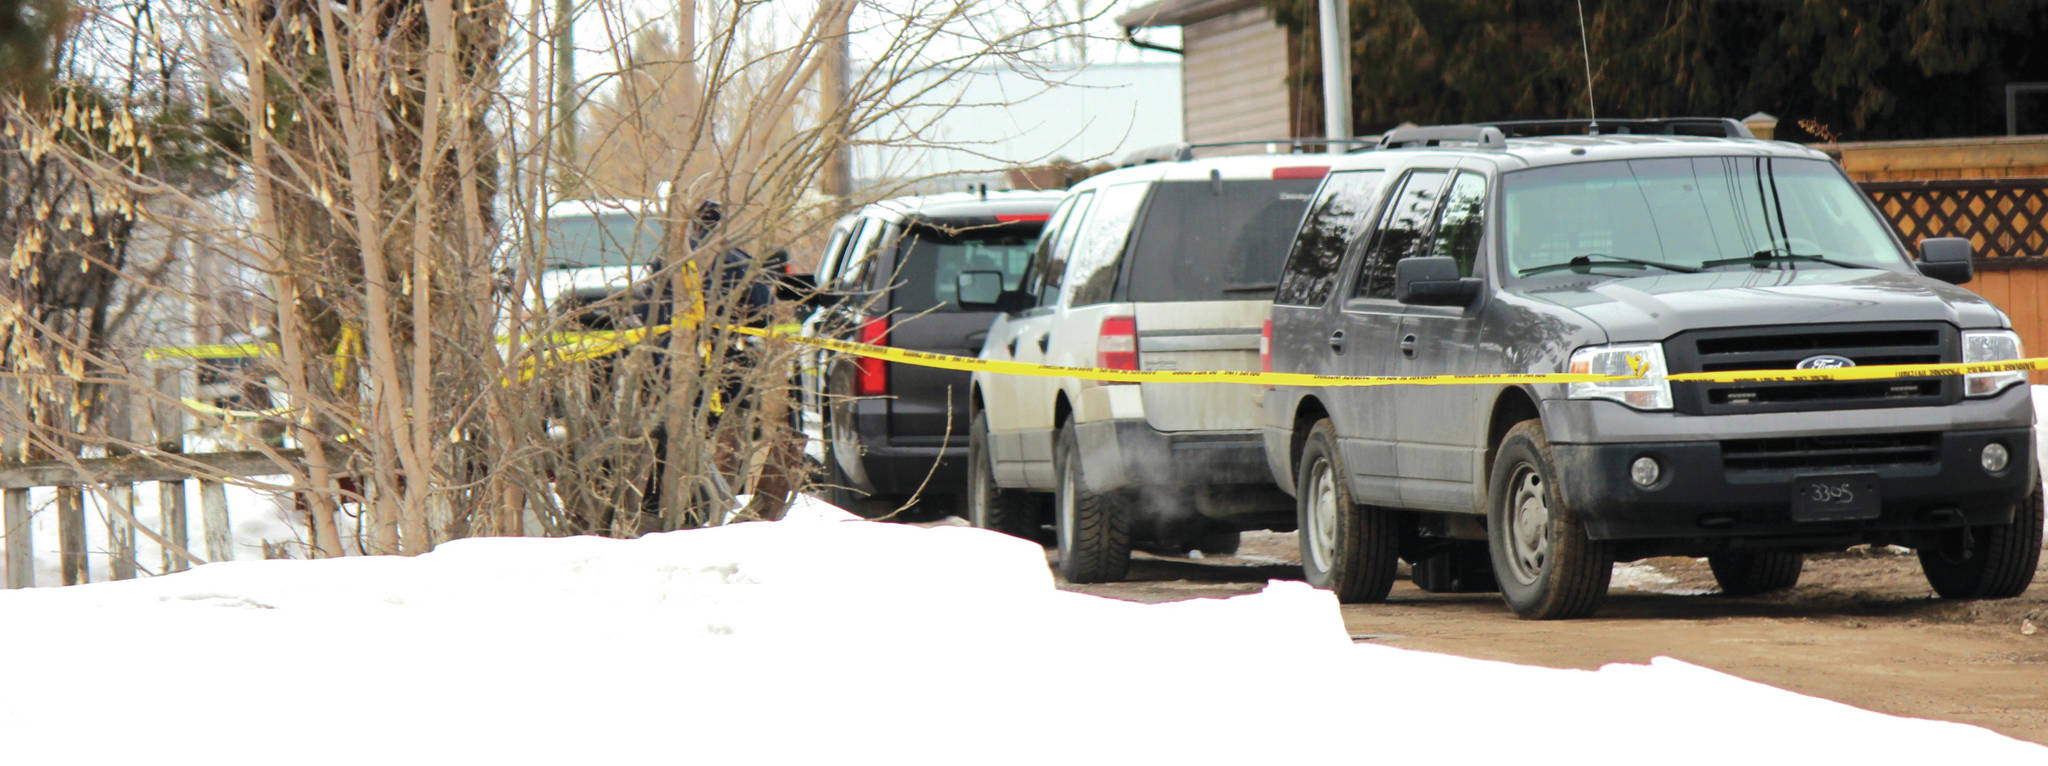 Vehicles parked in the back alley behind the cordoned off homes in Stettler. (Stettler Independent file photo)